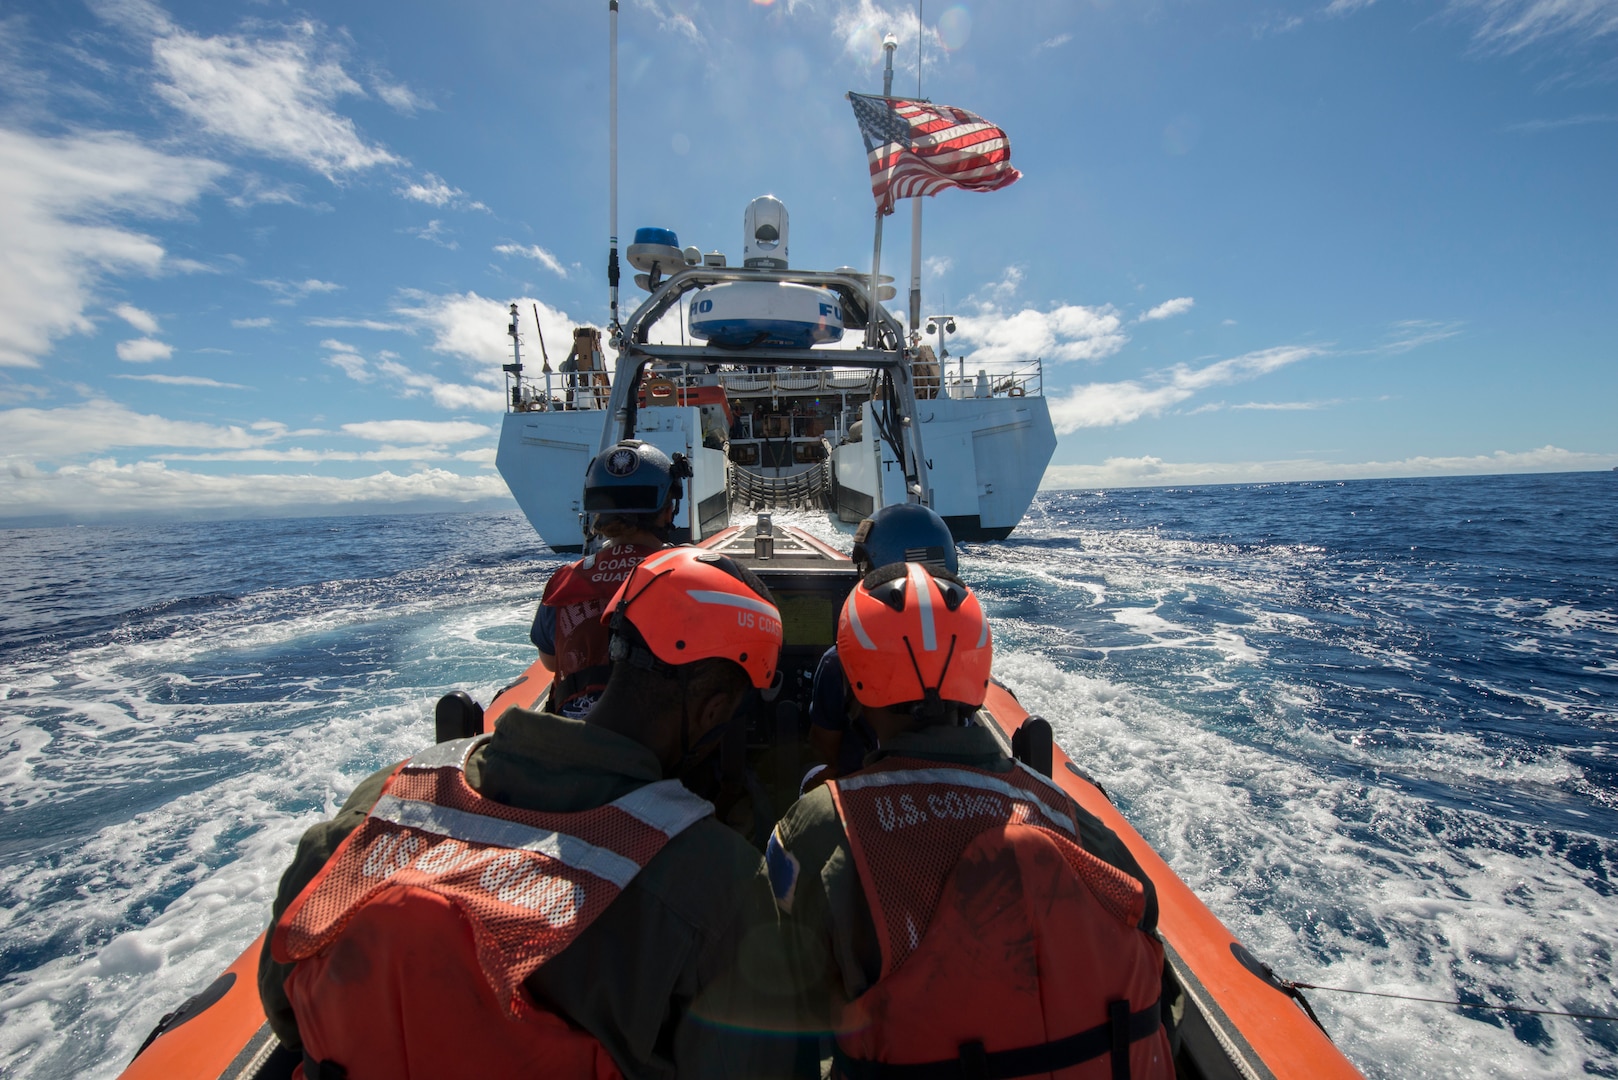 Coast Guard Cutter Stratton's crewmembers aboard Coast Guard small boat return to Stratton after a humanitarian assistance/disaster relief event for Rim of Pacific Exercise 2016, Wednesday, July 13, 2016. Twenty-six nations, 49 ships, six submarines, about 200 aircraft, and 25,00 personnel are participating in RIMPAC from June 29 to Aug. 4 in and around the Hawaiian Islands and Southern California. The world's largest international maritime exercise, RIMPAC provides a unique training opportunity while fostering and sustaining cooperative relationships between participants critical to ensuring the safety of sea lanes and security on the world's oceans. RIMPAC 2016 is the 25th exercise in the series that began in 1971.